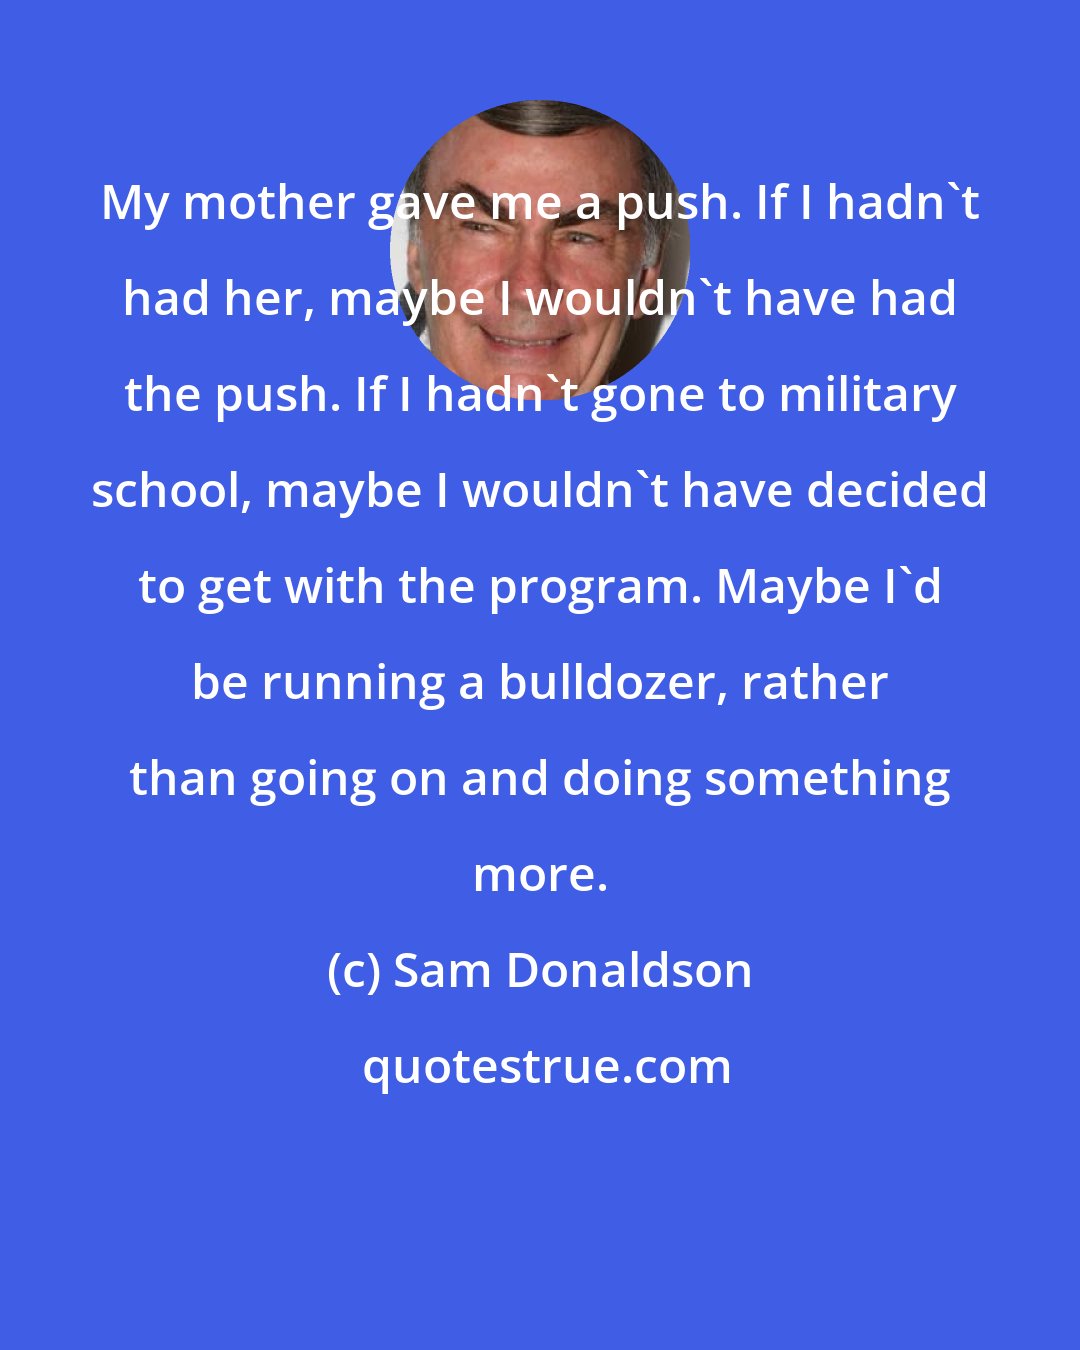 Sam Donaldson: My mother gave me a push. If I hadn't had her, maybe I wouldn't have had the push. If I hadn't gone to military school, maybe I wouldn't have decided to get with the program. Maybe I'd be running a bulldozer, rather than going on and doing something more.